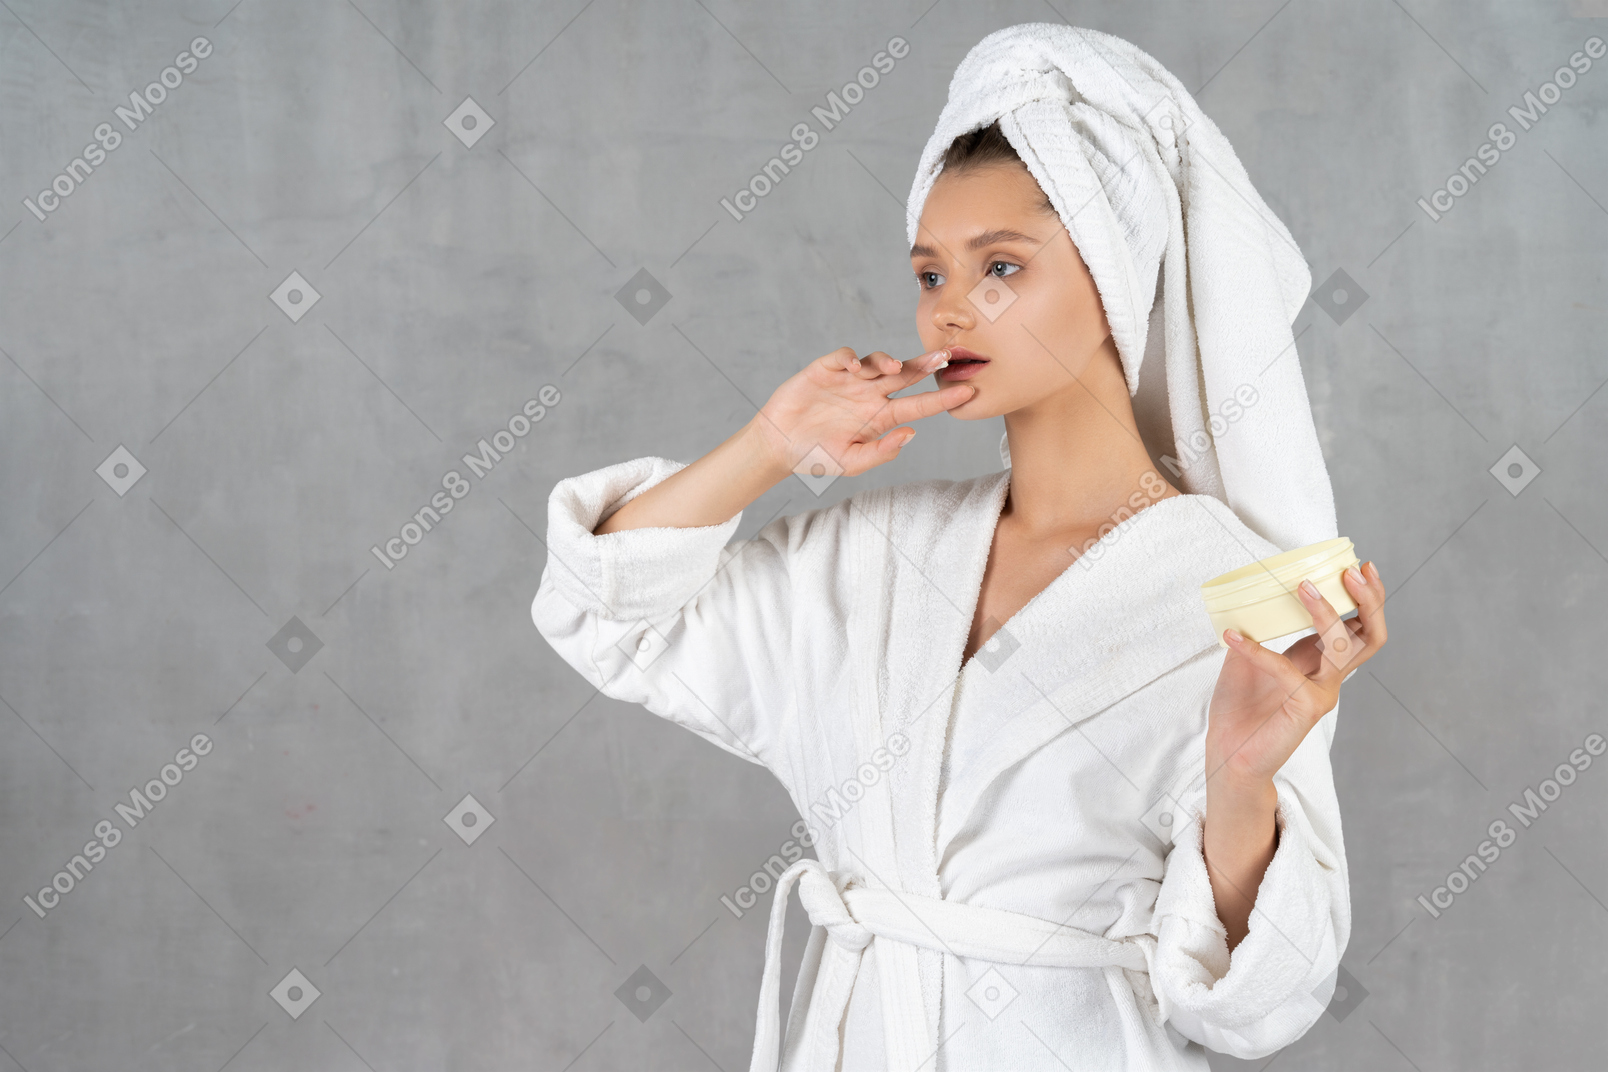 Woman in bathrobe touching her lip and holding tub of cream